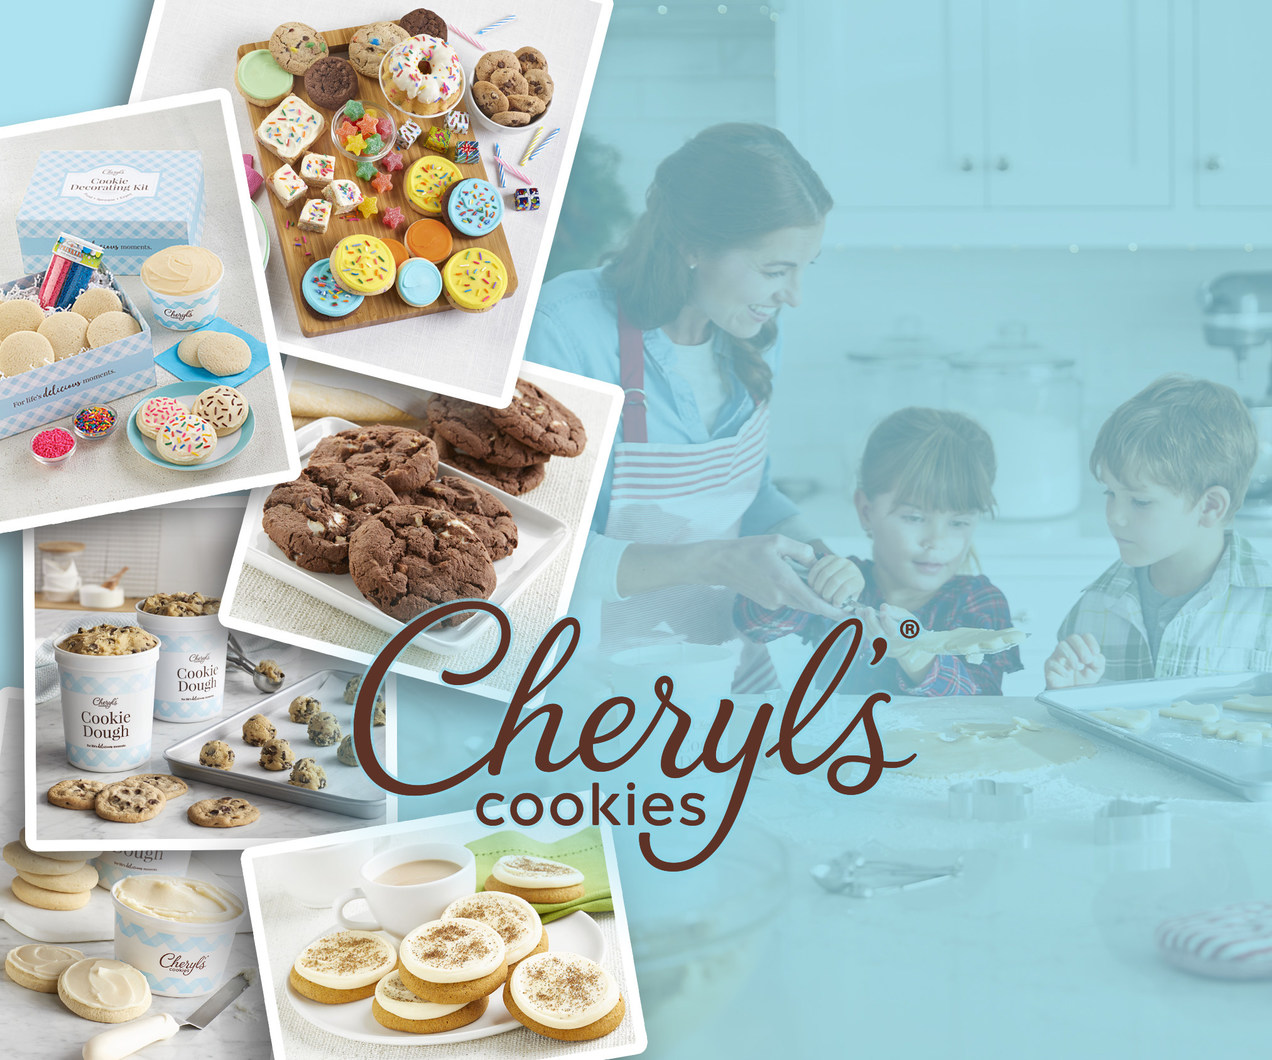 Cheryl's Cookies® Bakes up a Batch of Innovative New Products and